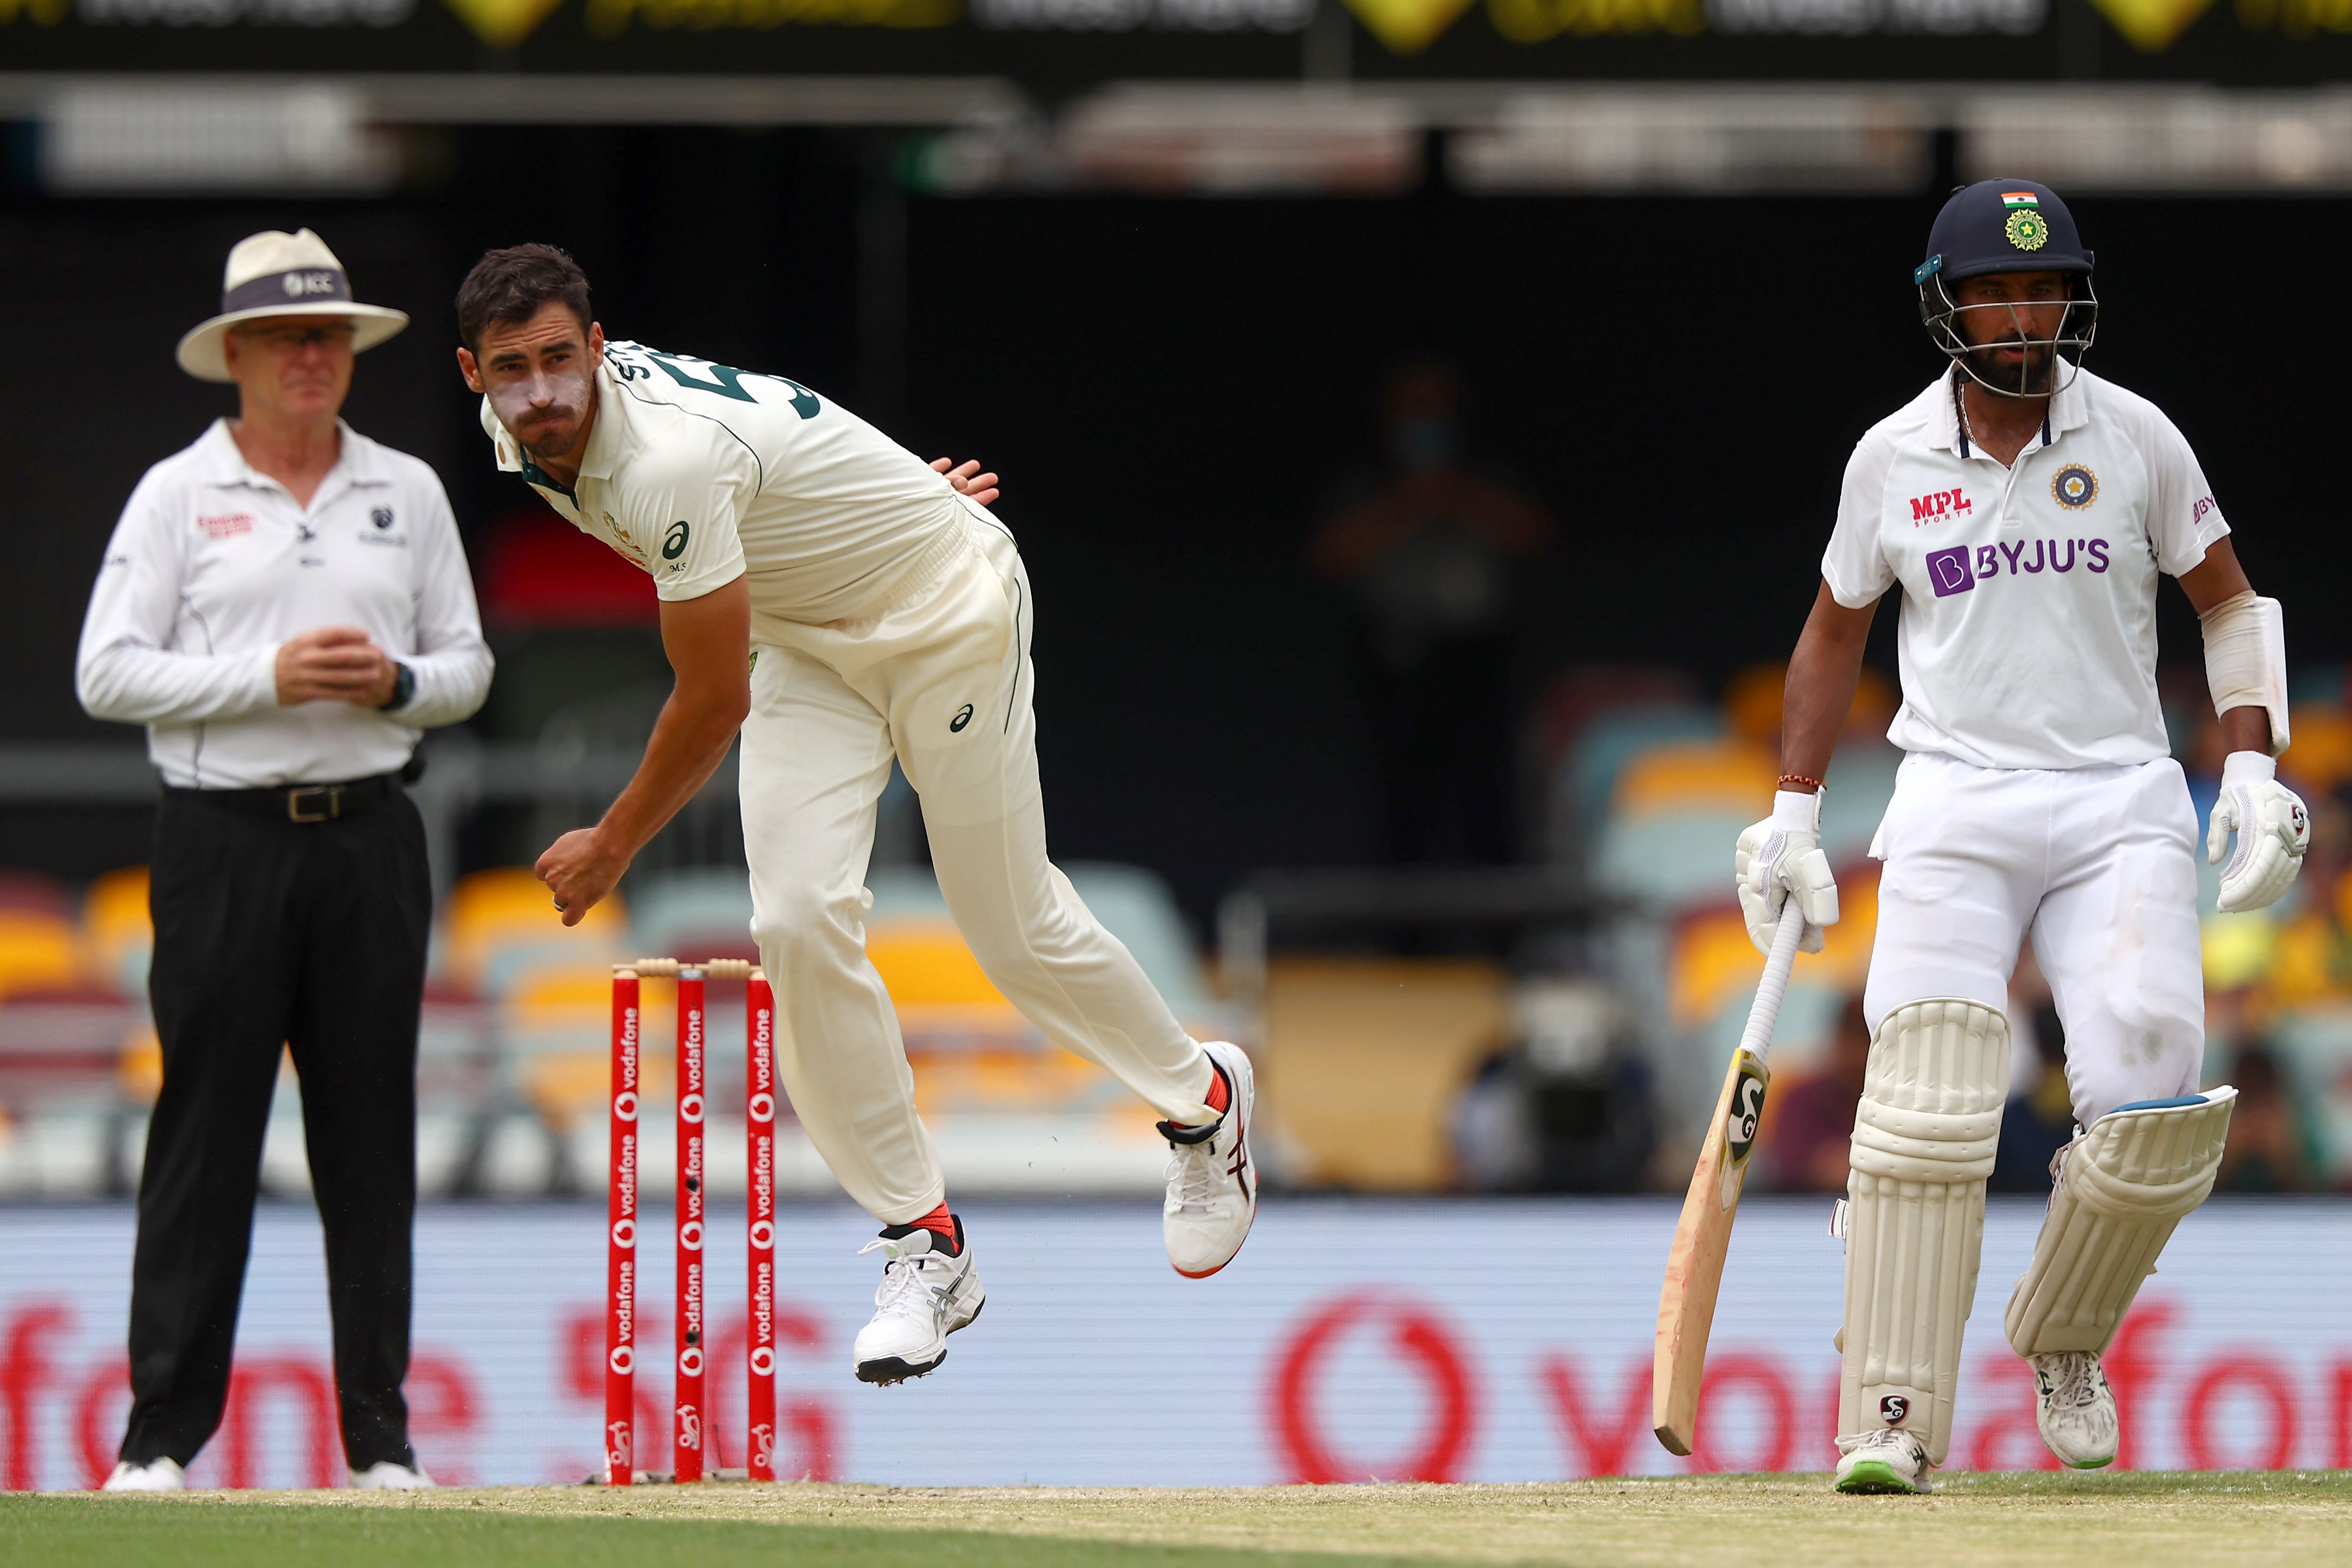 Australia's paceman Mitchell Starc (C) bowls as India's batsman Cheteshwar Pujara (R) looks on during the day three of the fourth cricket Test match between Australia and India at the Gabba in Brisbane. Credit: AFP